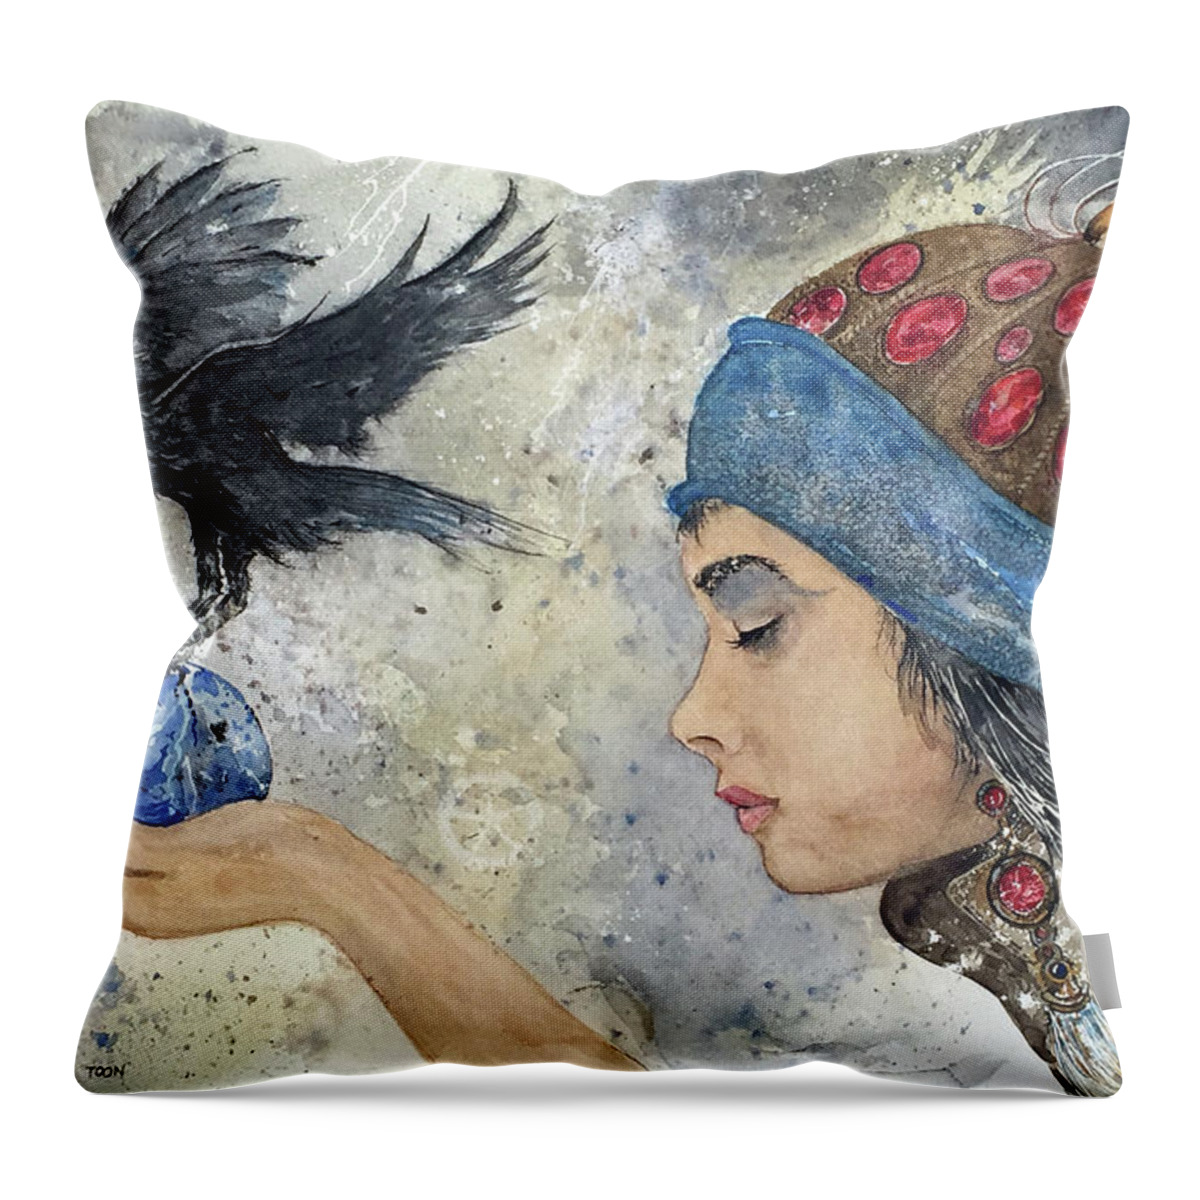 A Young Lady Holds An Orb With A Raven. Throw Pillow featuring the painting Orb Maiden by Monte Toon